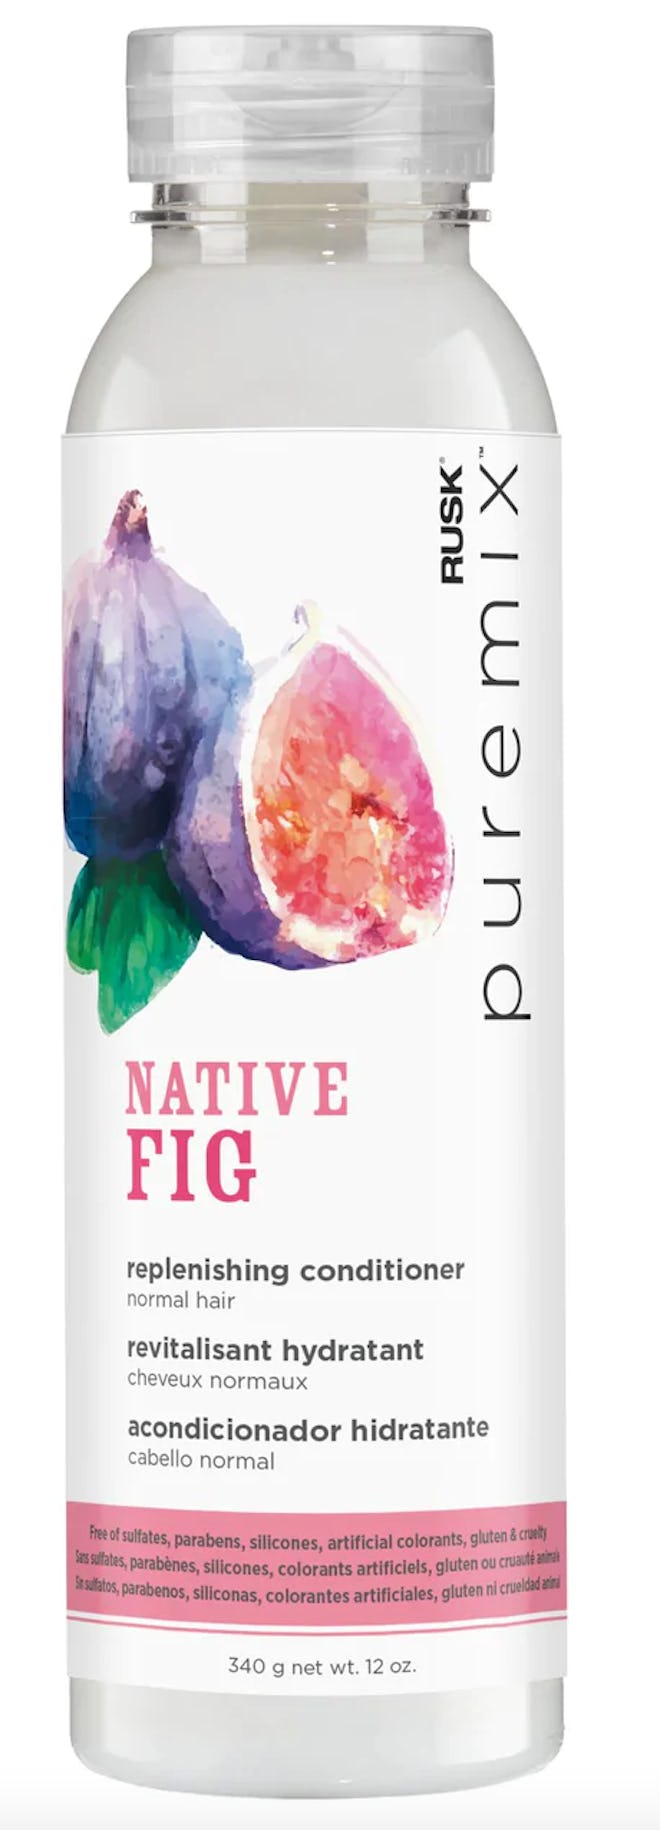 RUSK Native Fig Replenishing Conditioner for dry hair